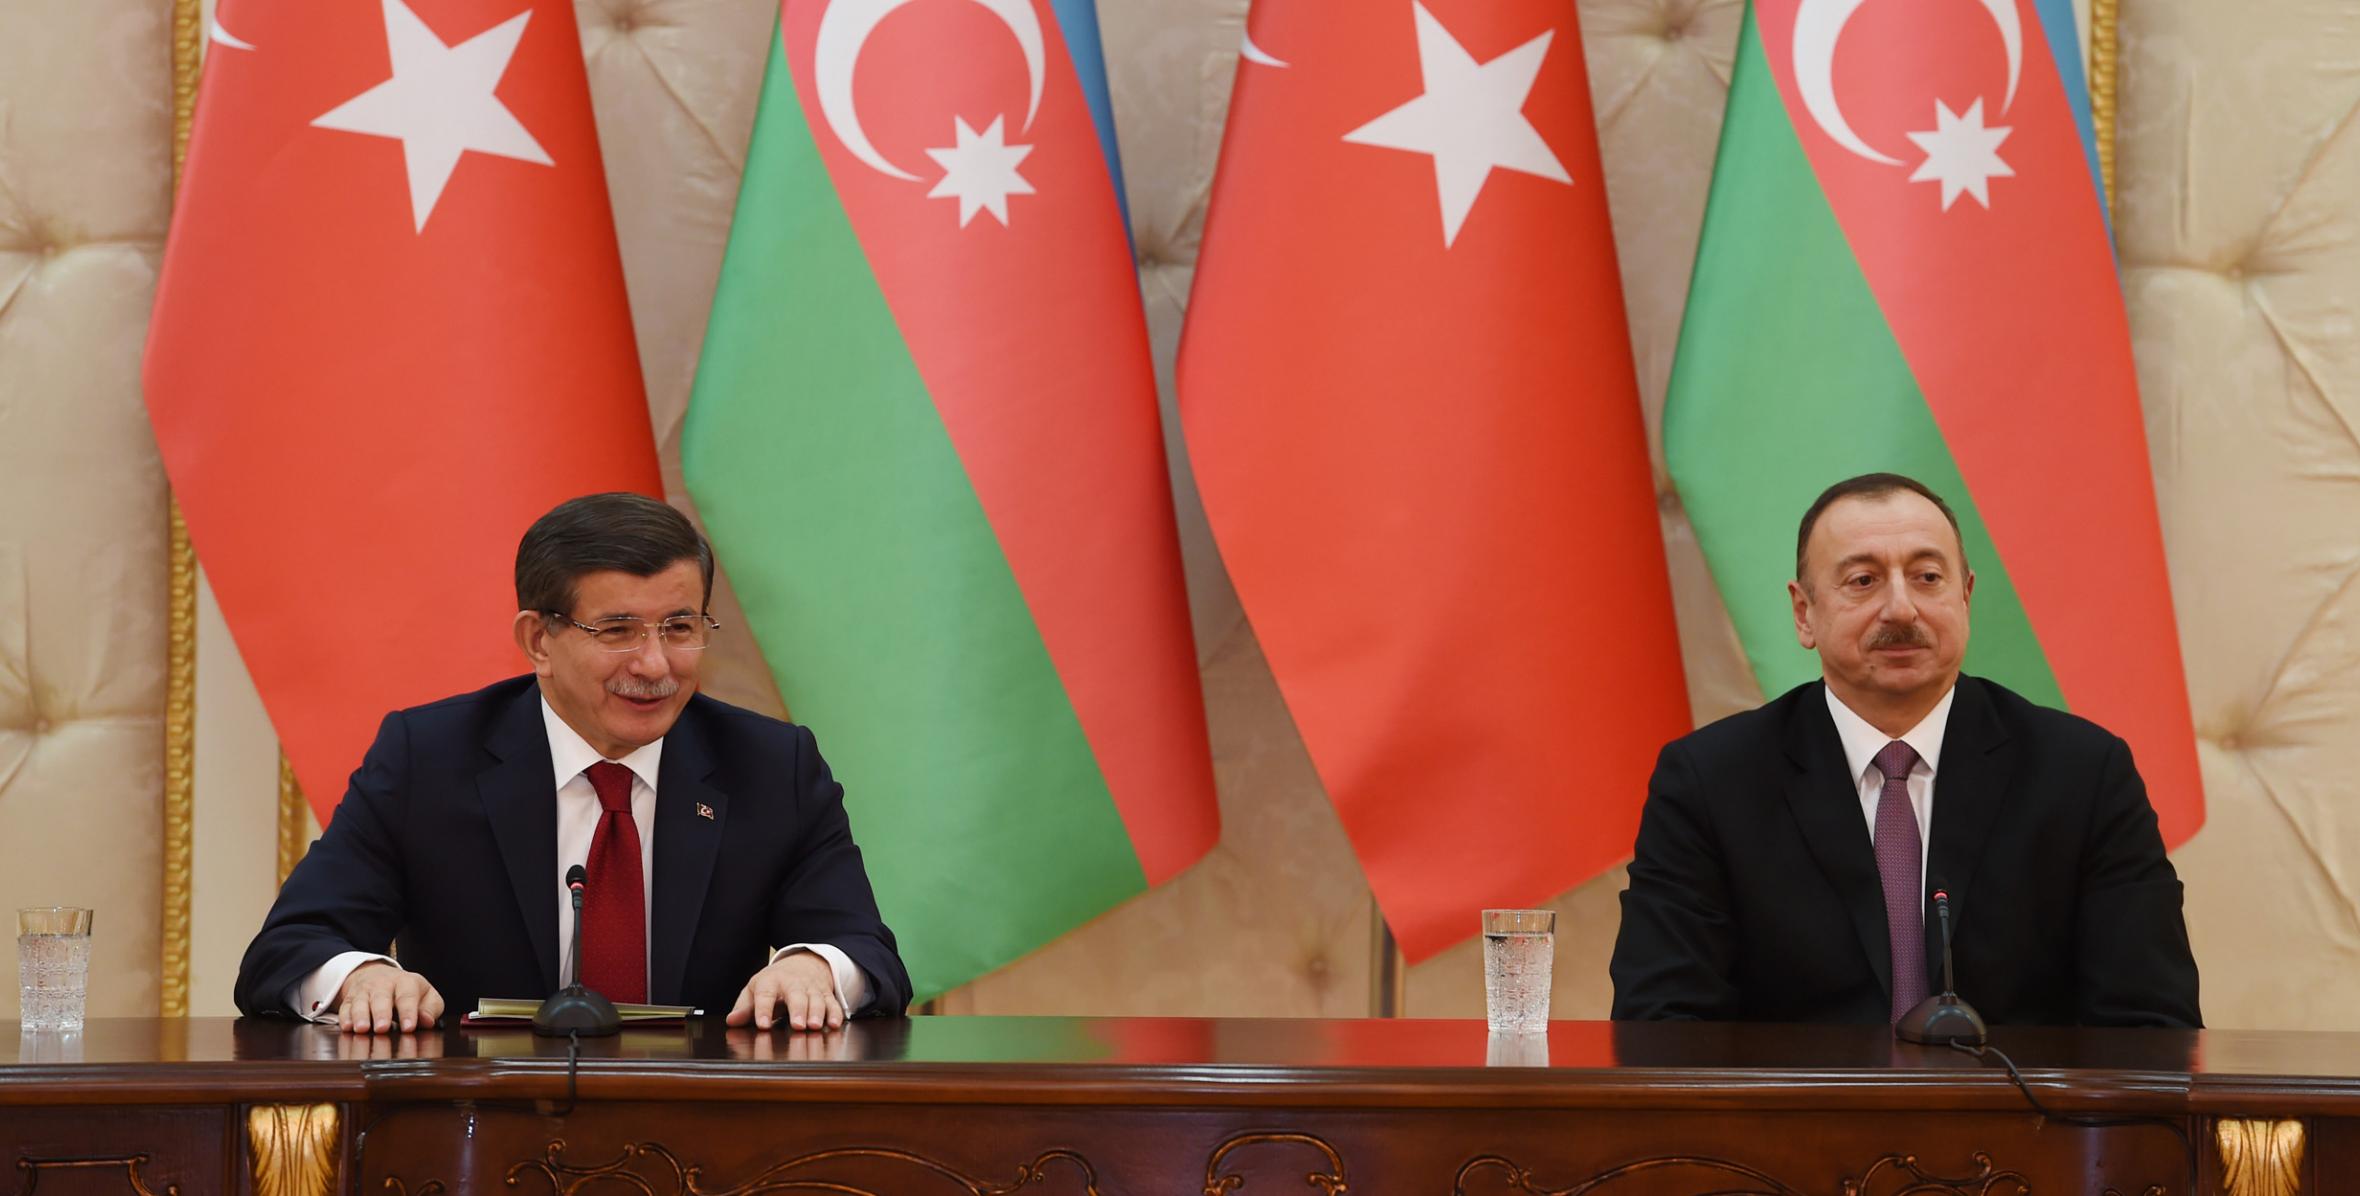 Ilham Aliyev and Turkish Prime Minister Ahmet Davutoglu made statements for the press